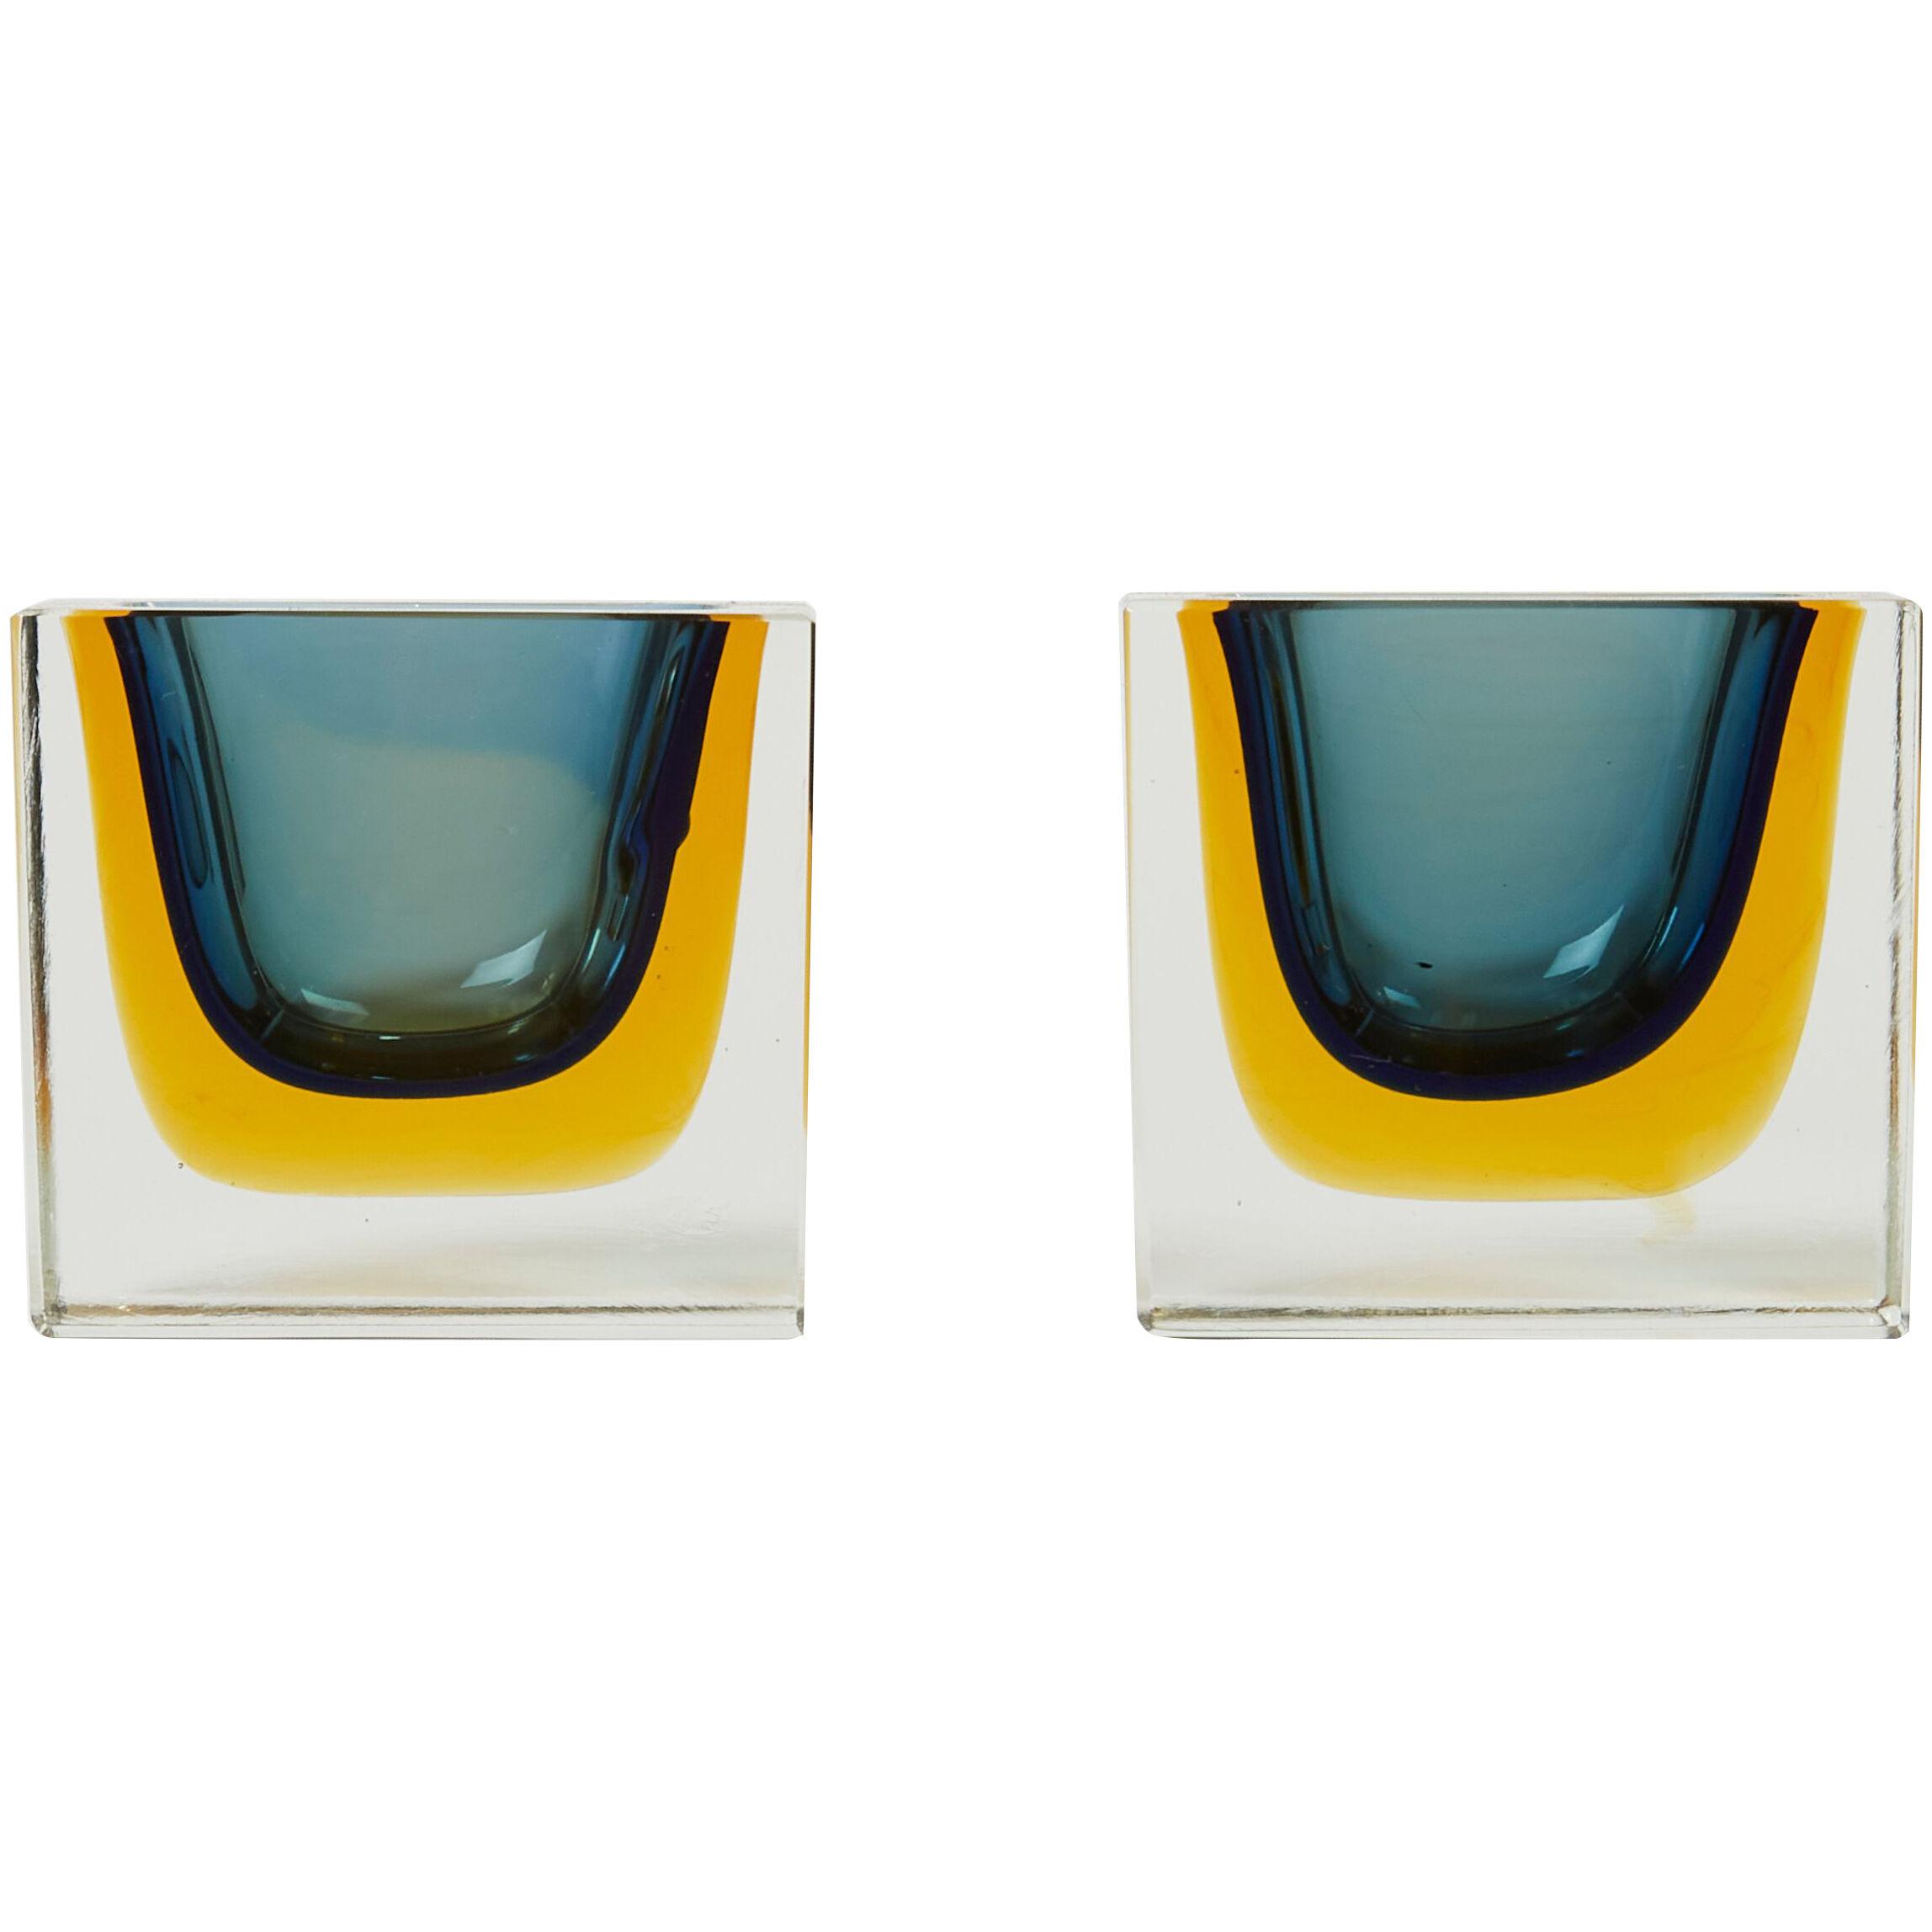  Flavio Poli pair of faceted small bowls Murano glass for Seguso 1960 